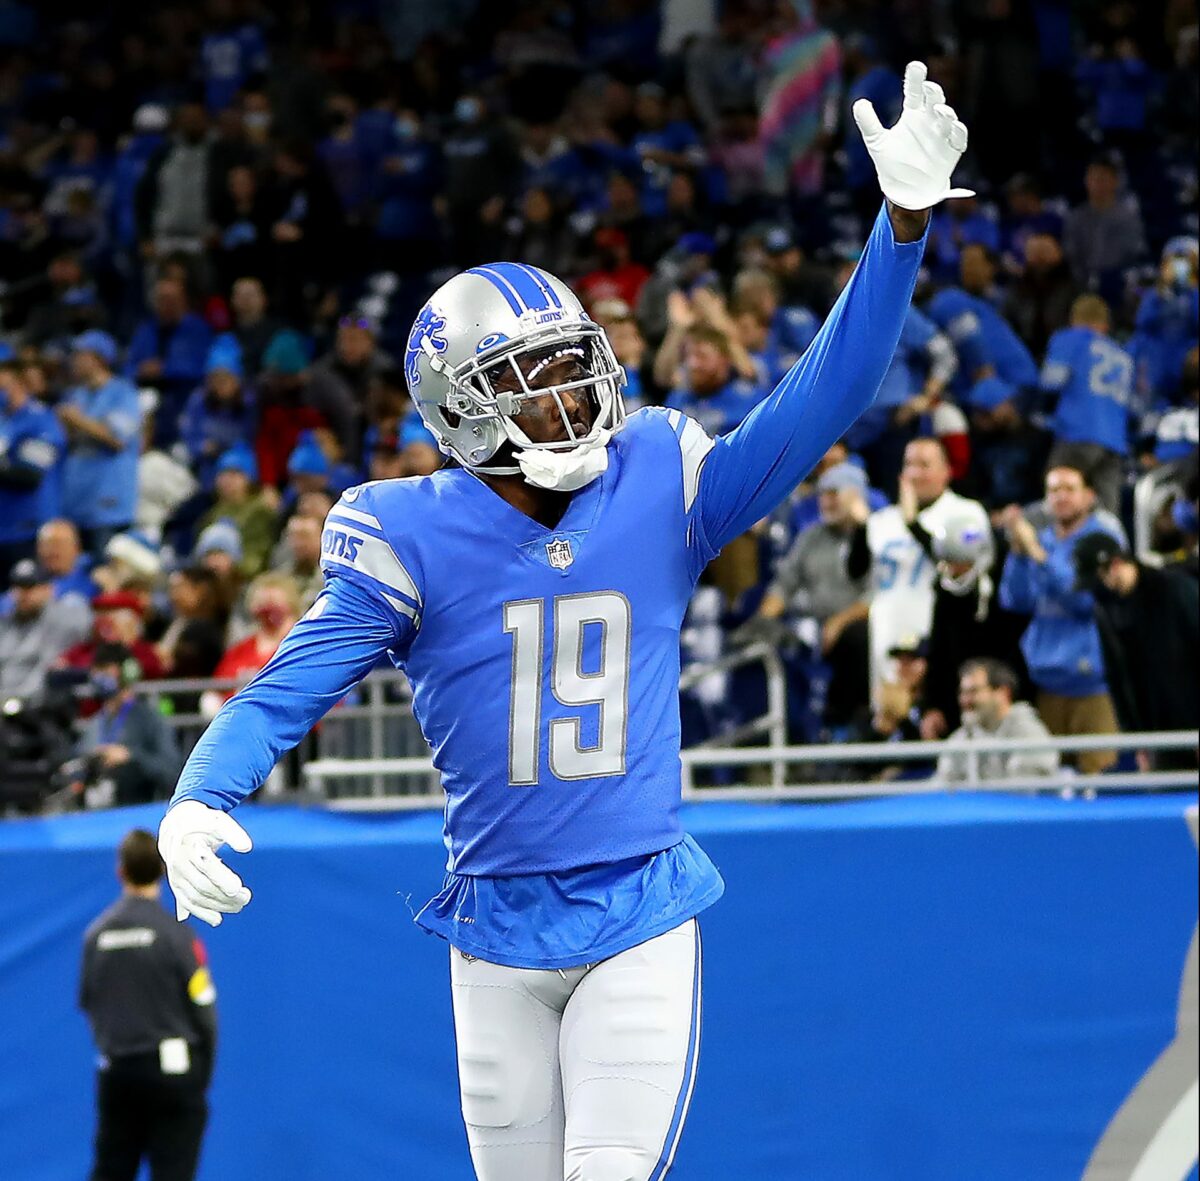 The Lions are bringing back CB Saivion Smith after his scary neck injury